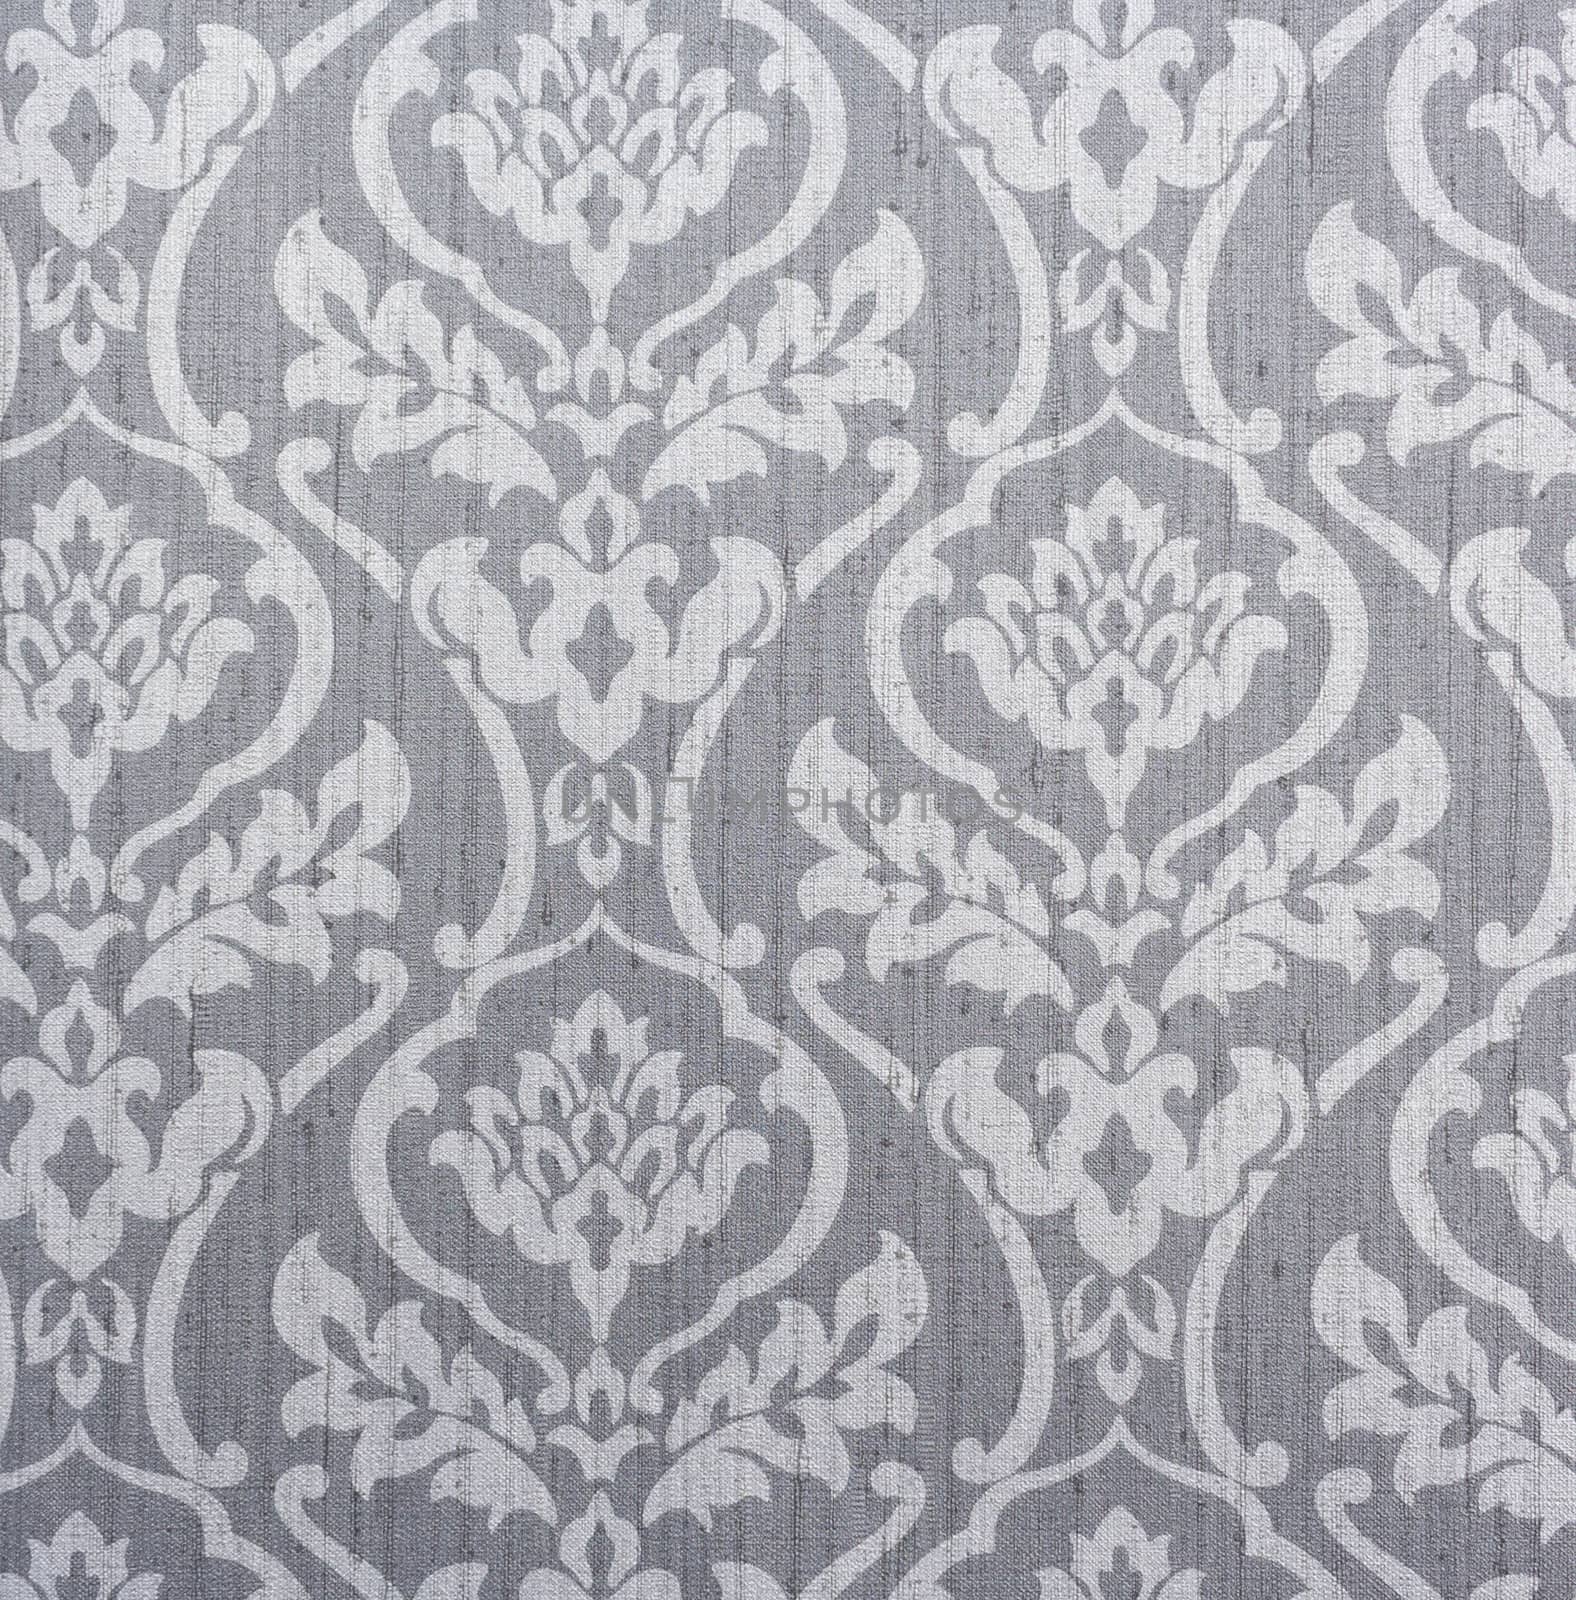 Seamless delicate wallpaper pattern Paper textured background by nopparats